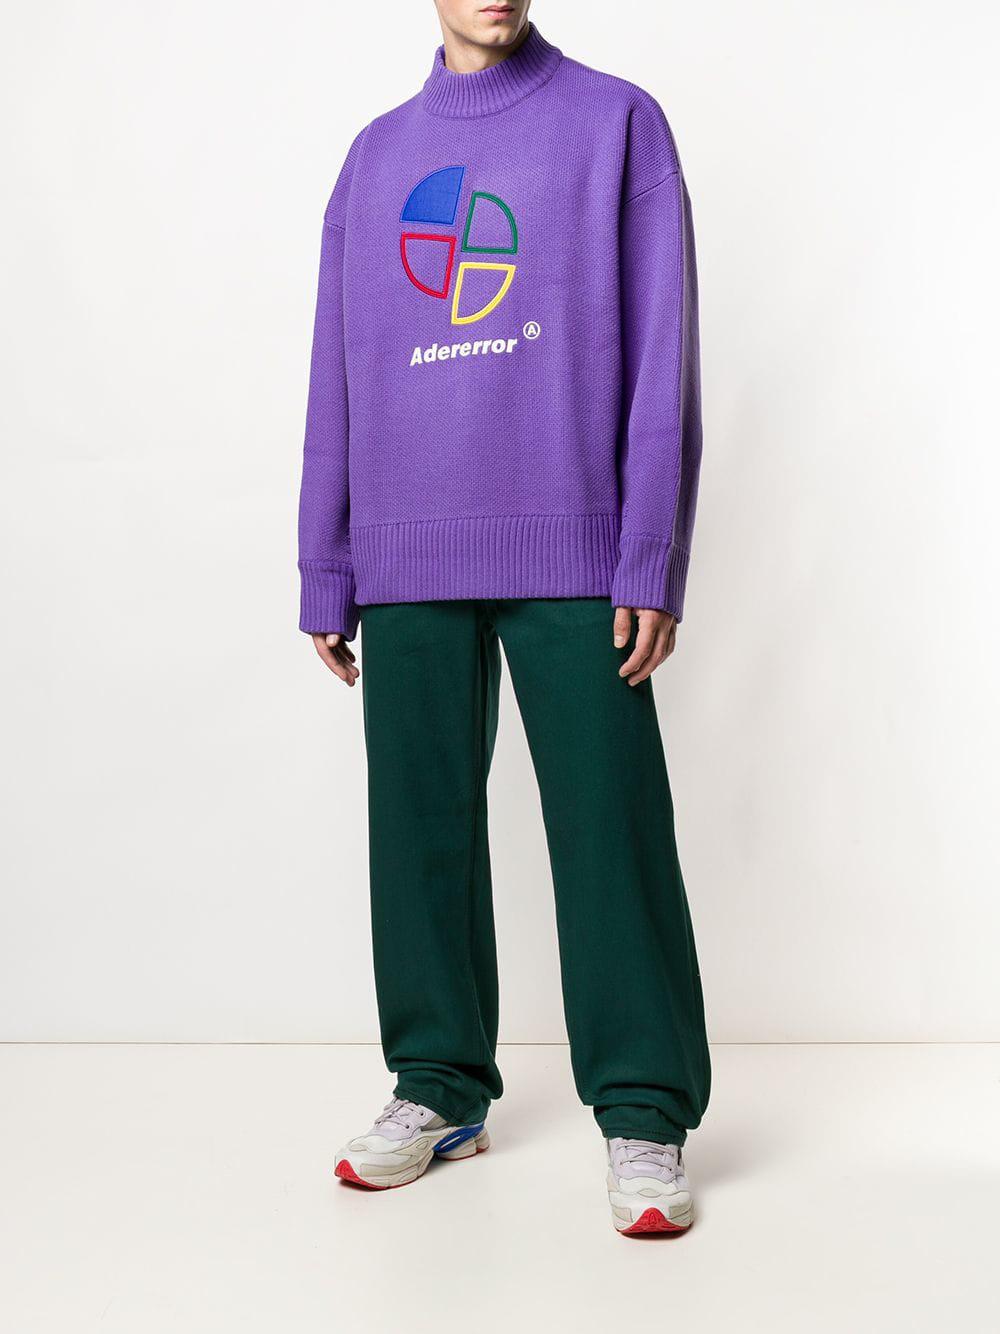 ADER error Logo Embroidered Sweater in Purple for Men | Lyst